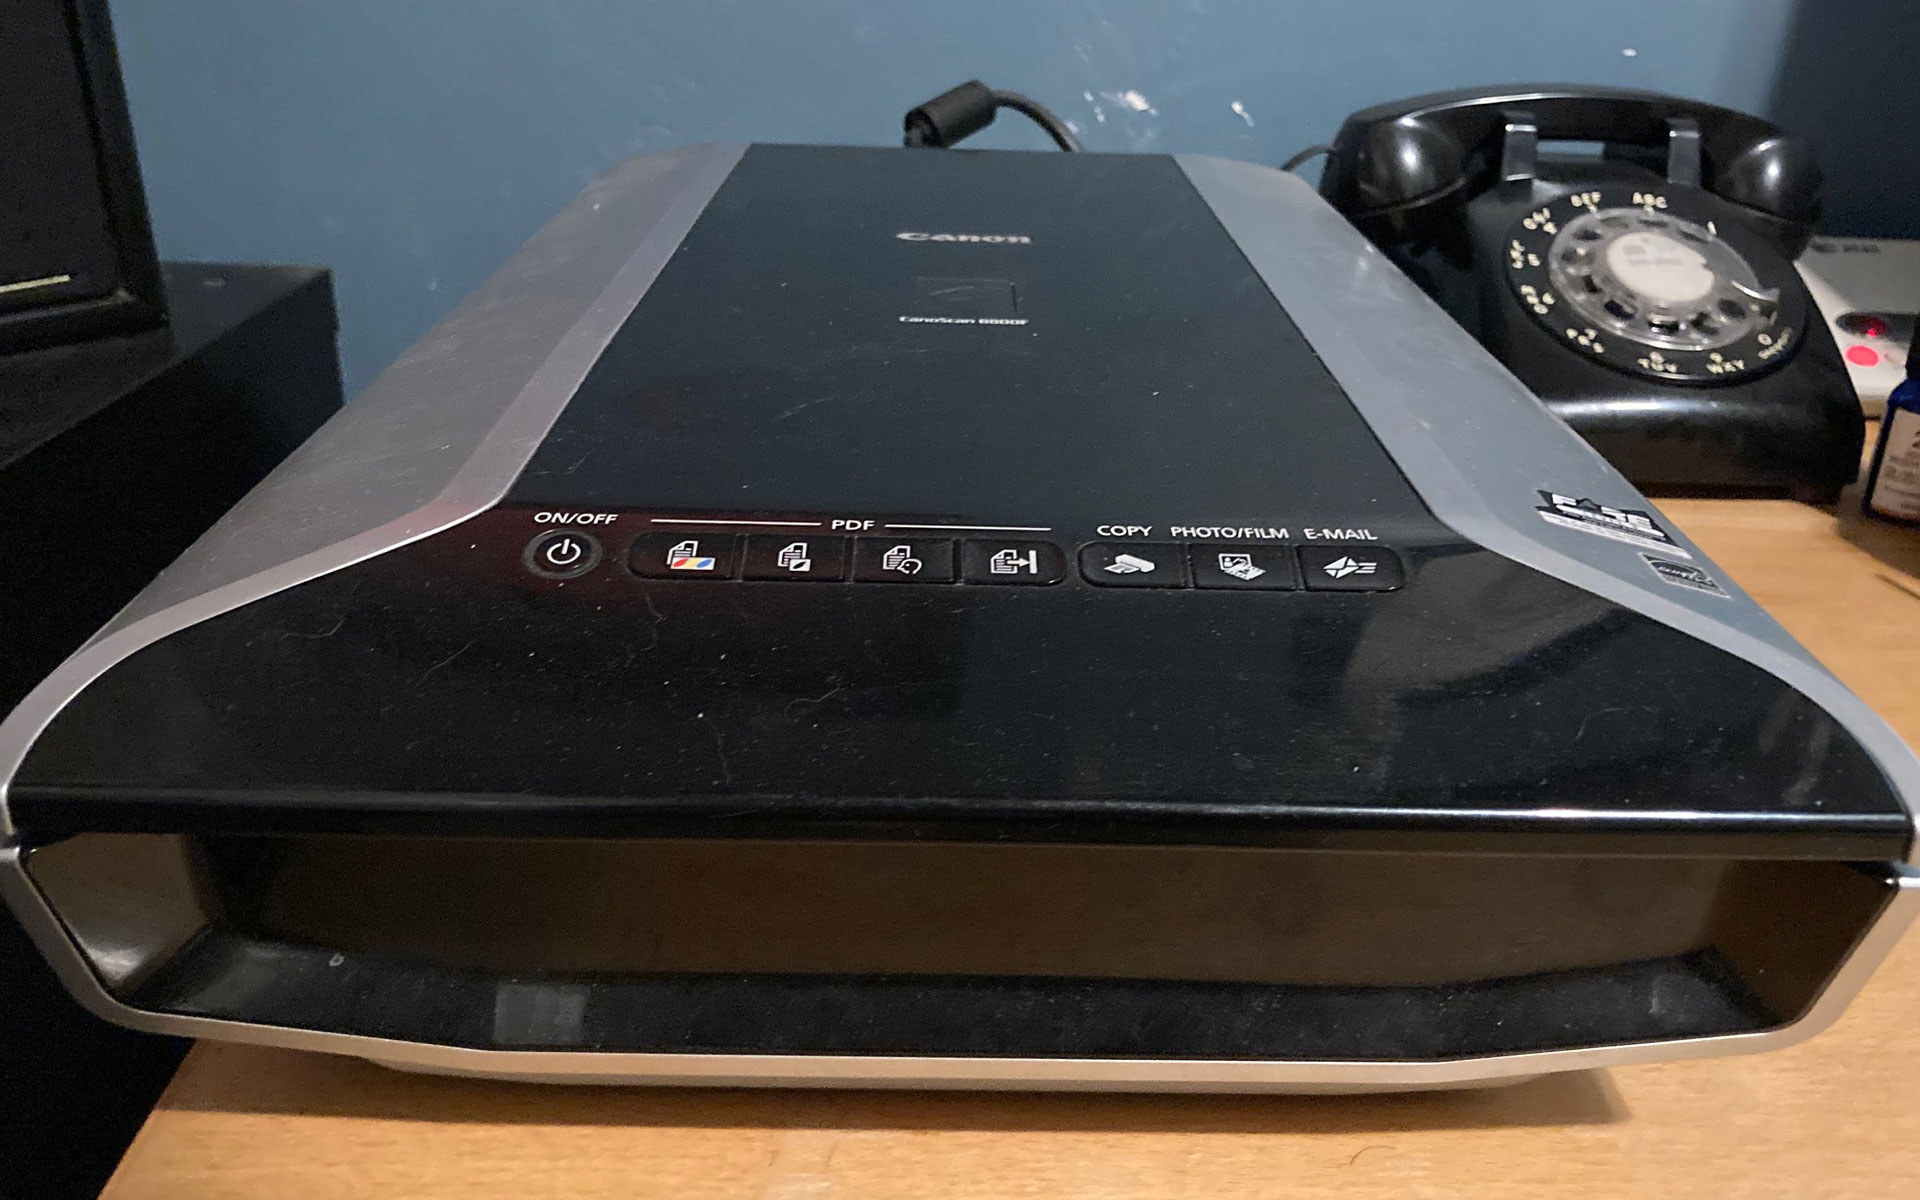 a canon scanner from 2010